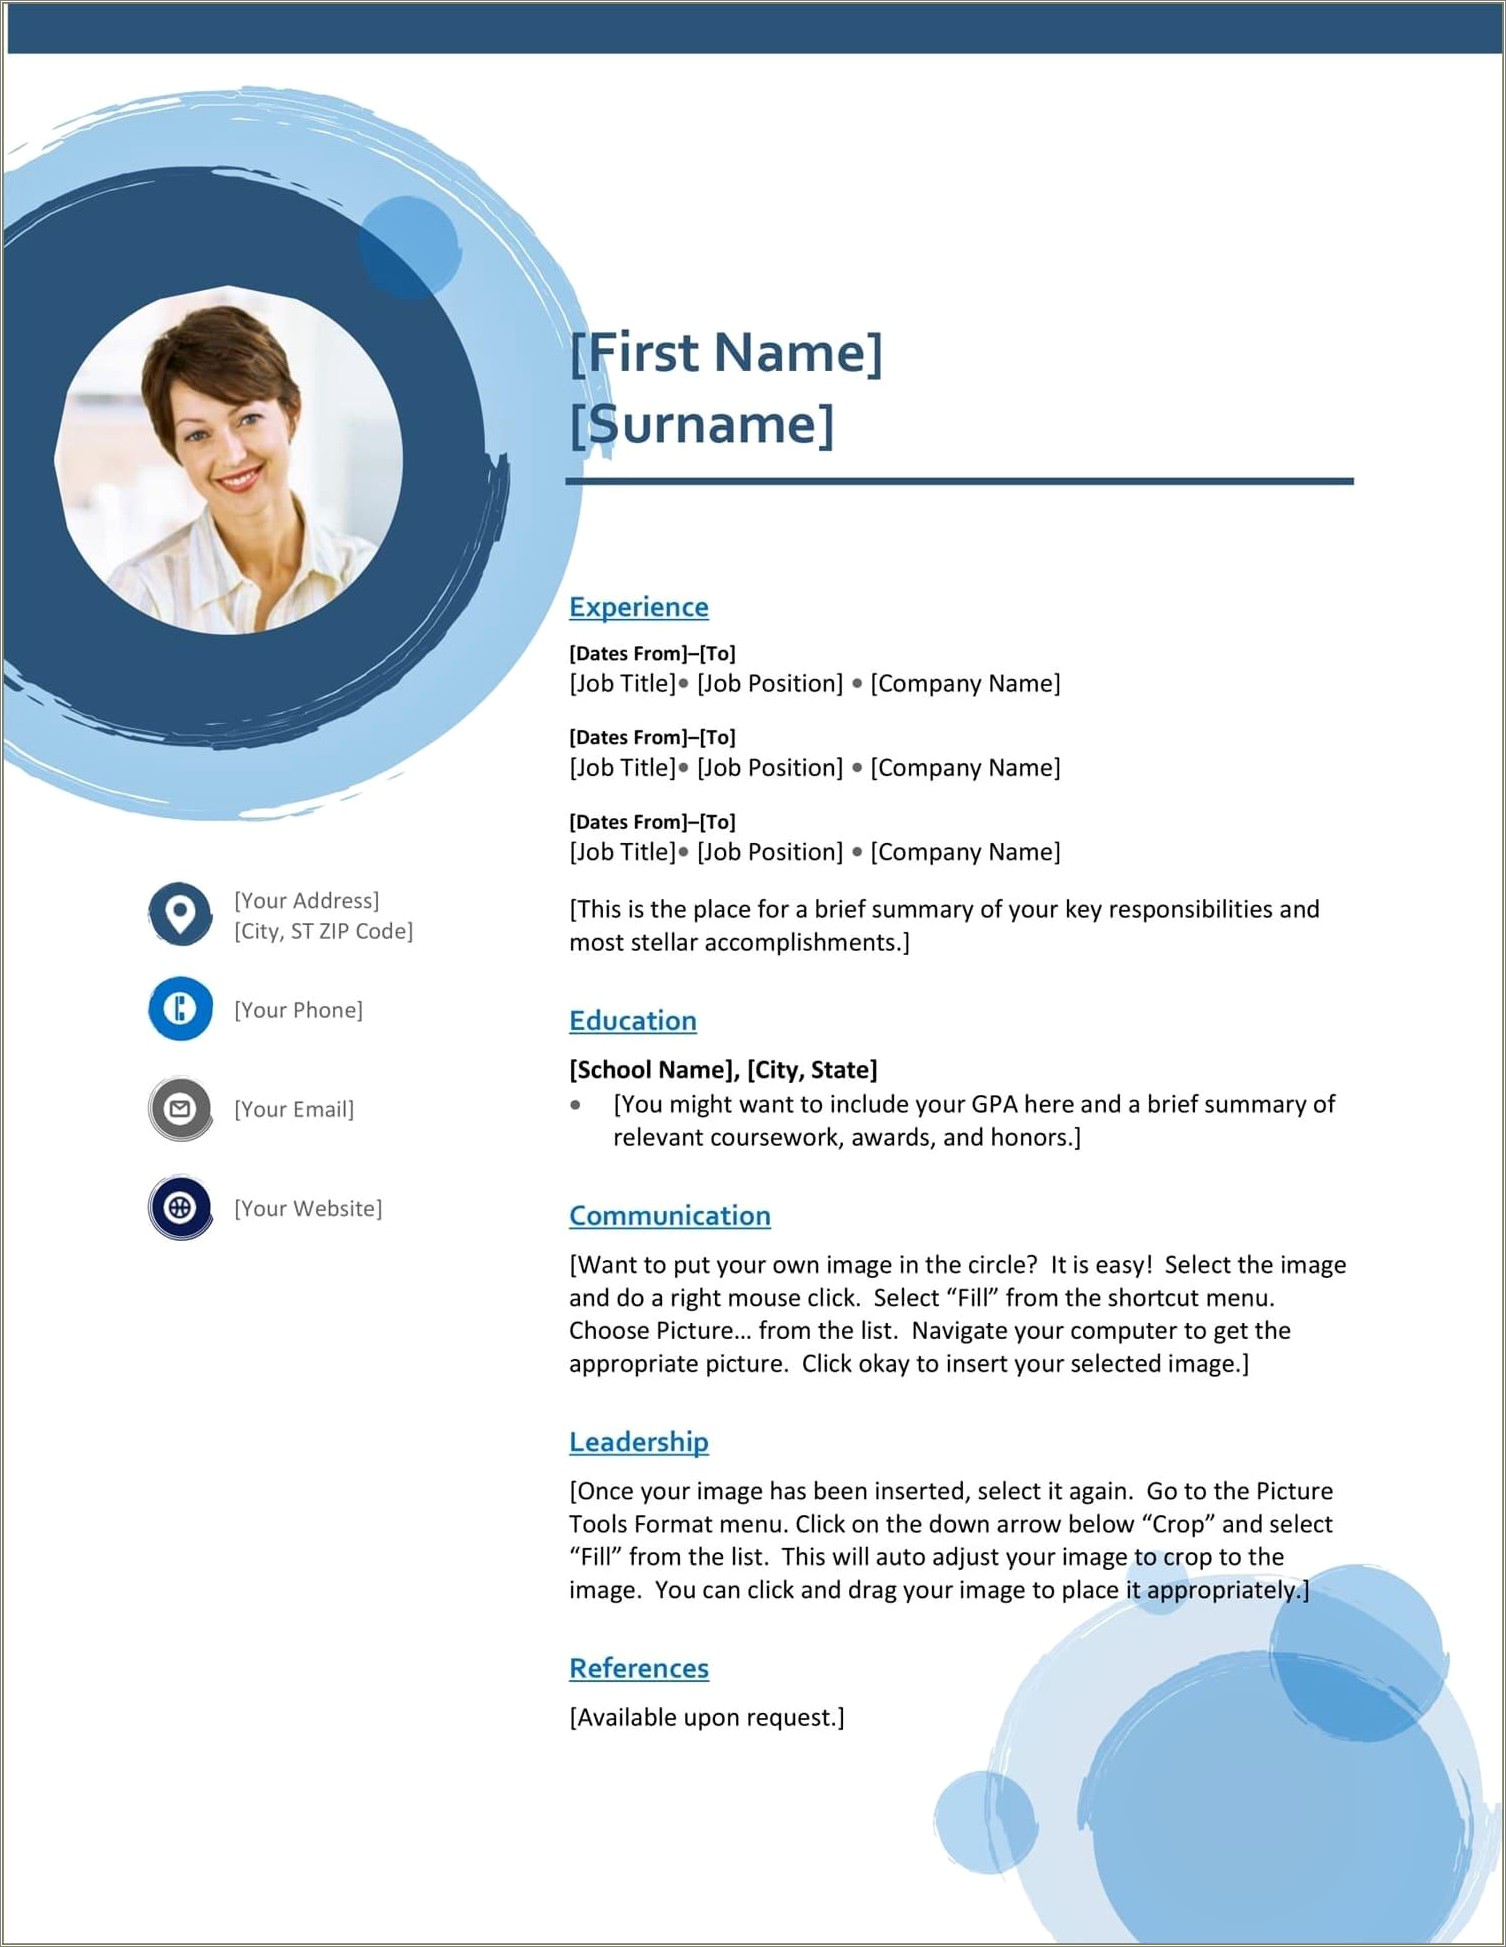 create-your-own-resume-for-free-resume-example-gallery